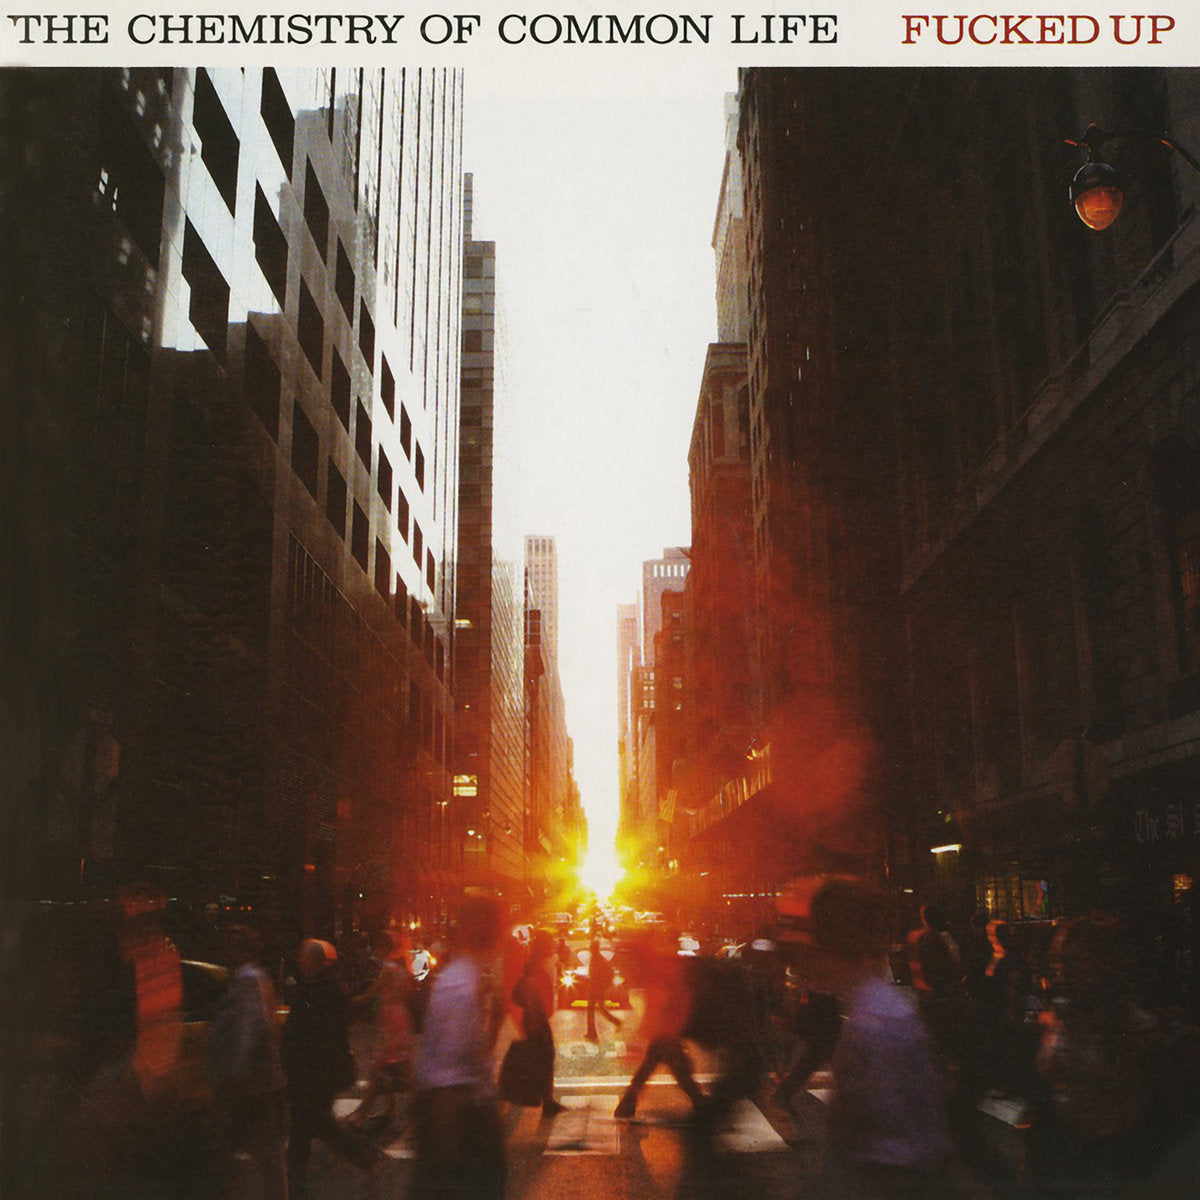 FUCKED UP "The Chemistry Of Common Life" 2xLP